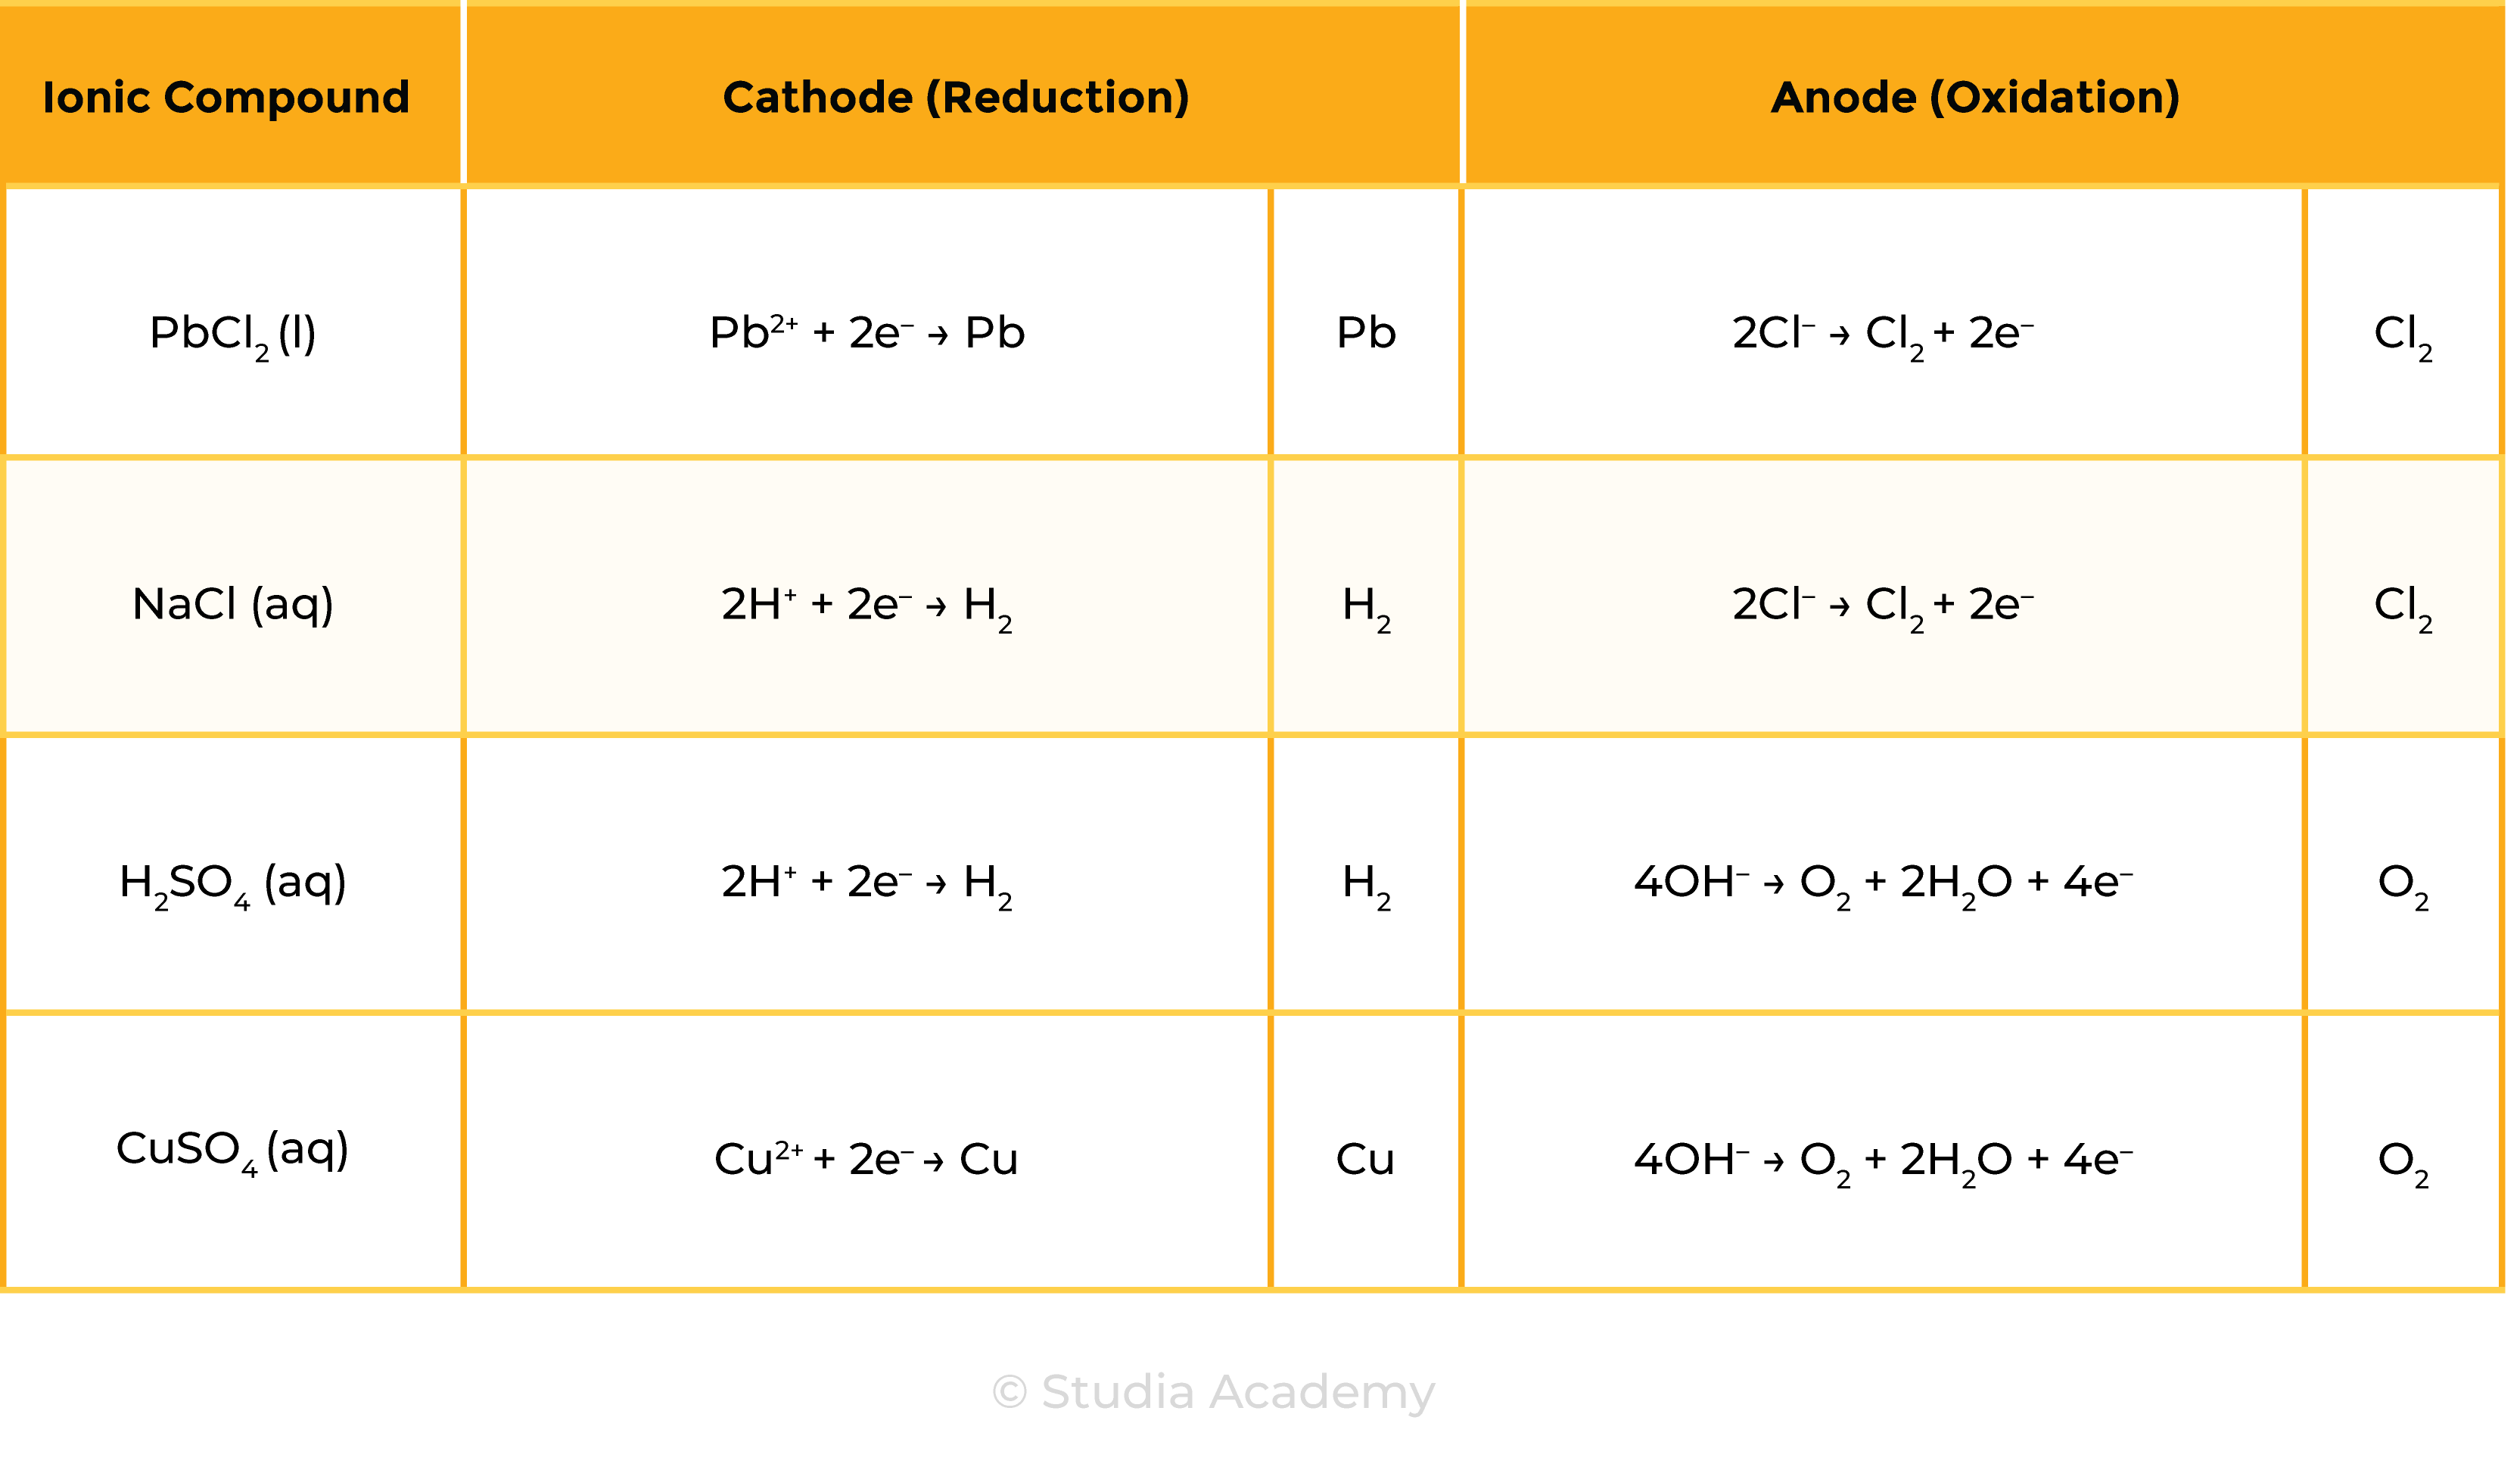 edexcel_igcse_chemistry_topic 09 tables_electrolysis_005_ionic half equations at anode and cathode